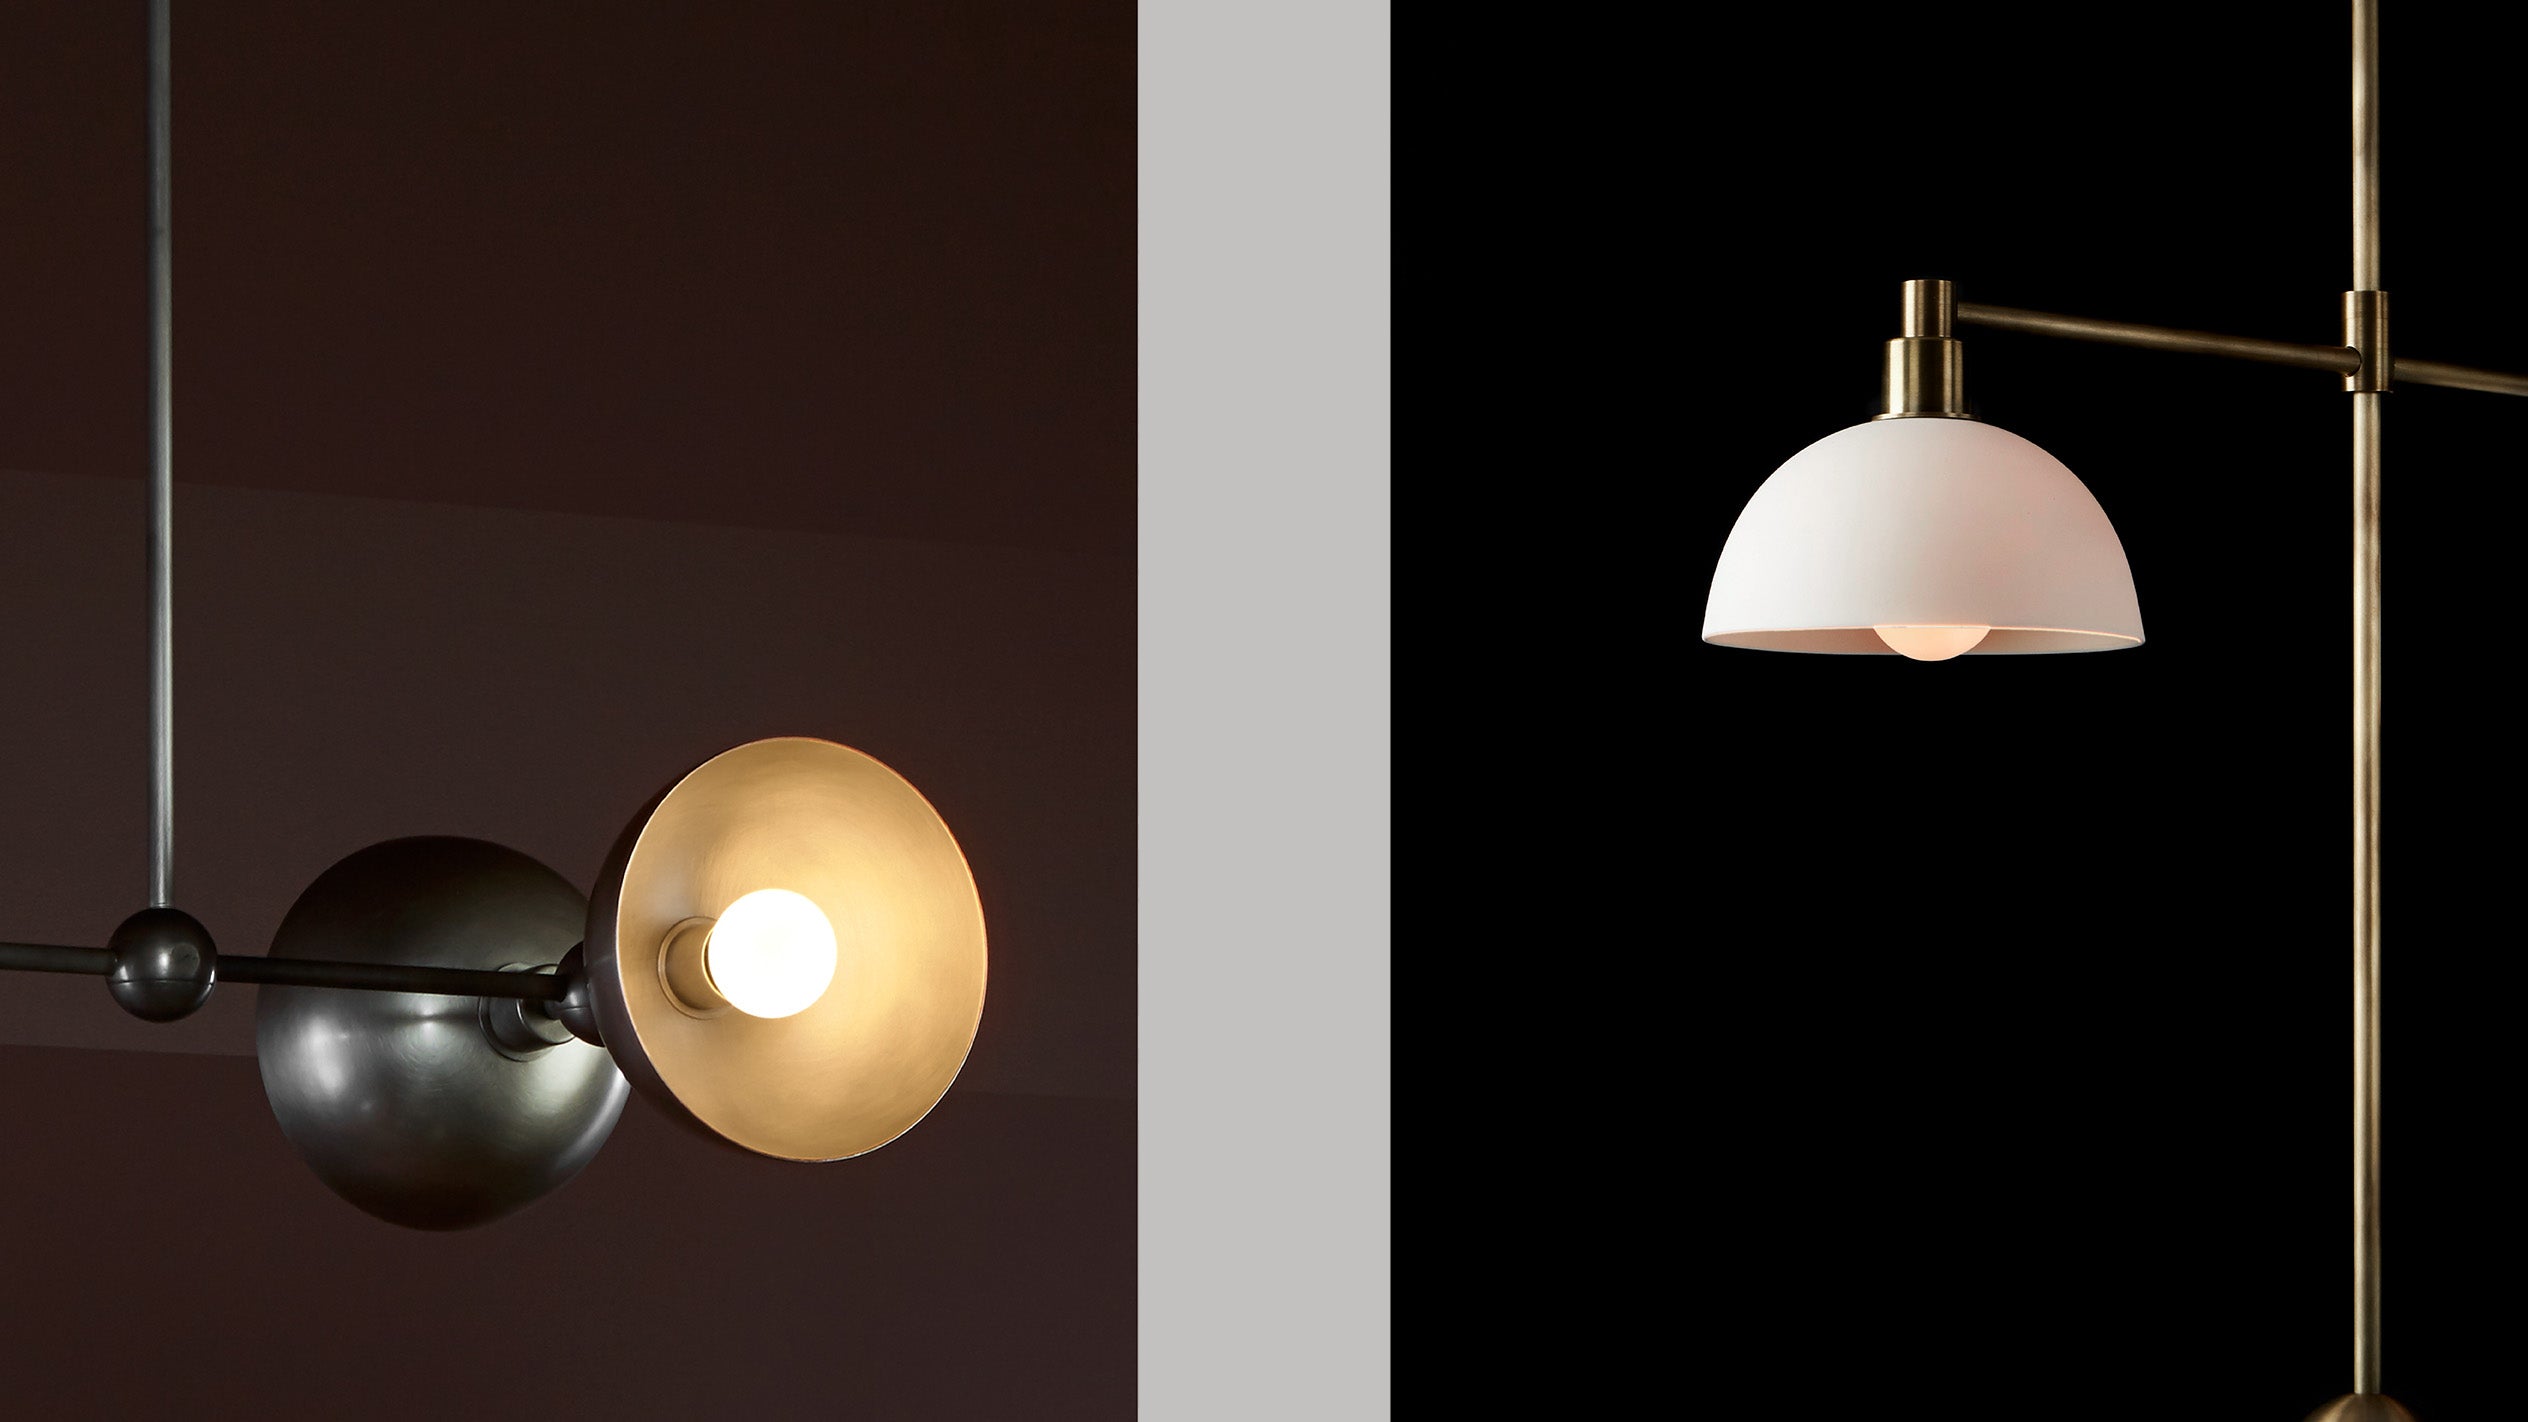 Close ups of TRAPEZE : 4 MOBILE ceiling pendant showing details of the Tarnished Silver finish, Aged Brass finish and Porcelain bowls. 